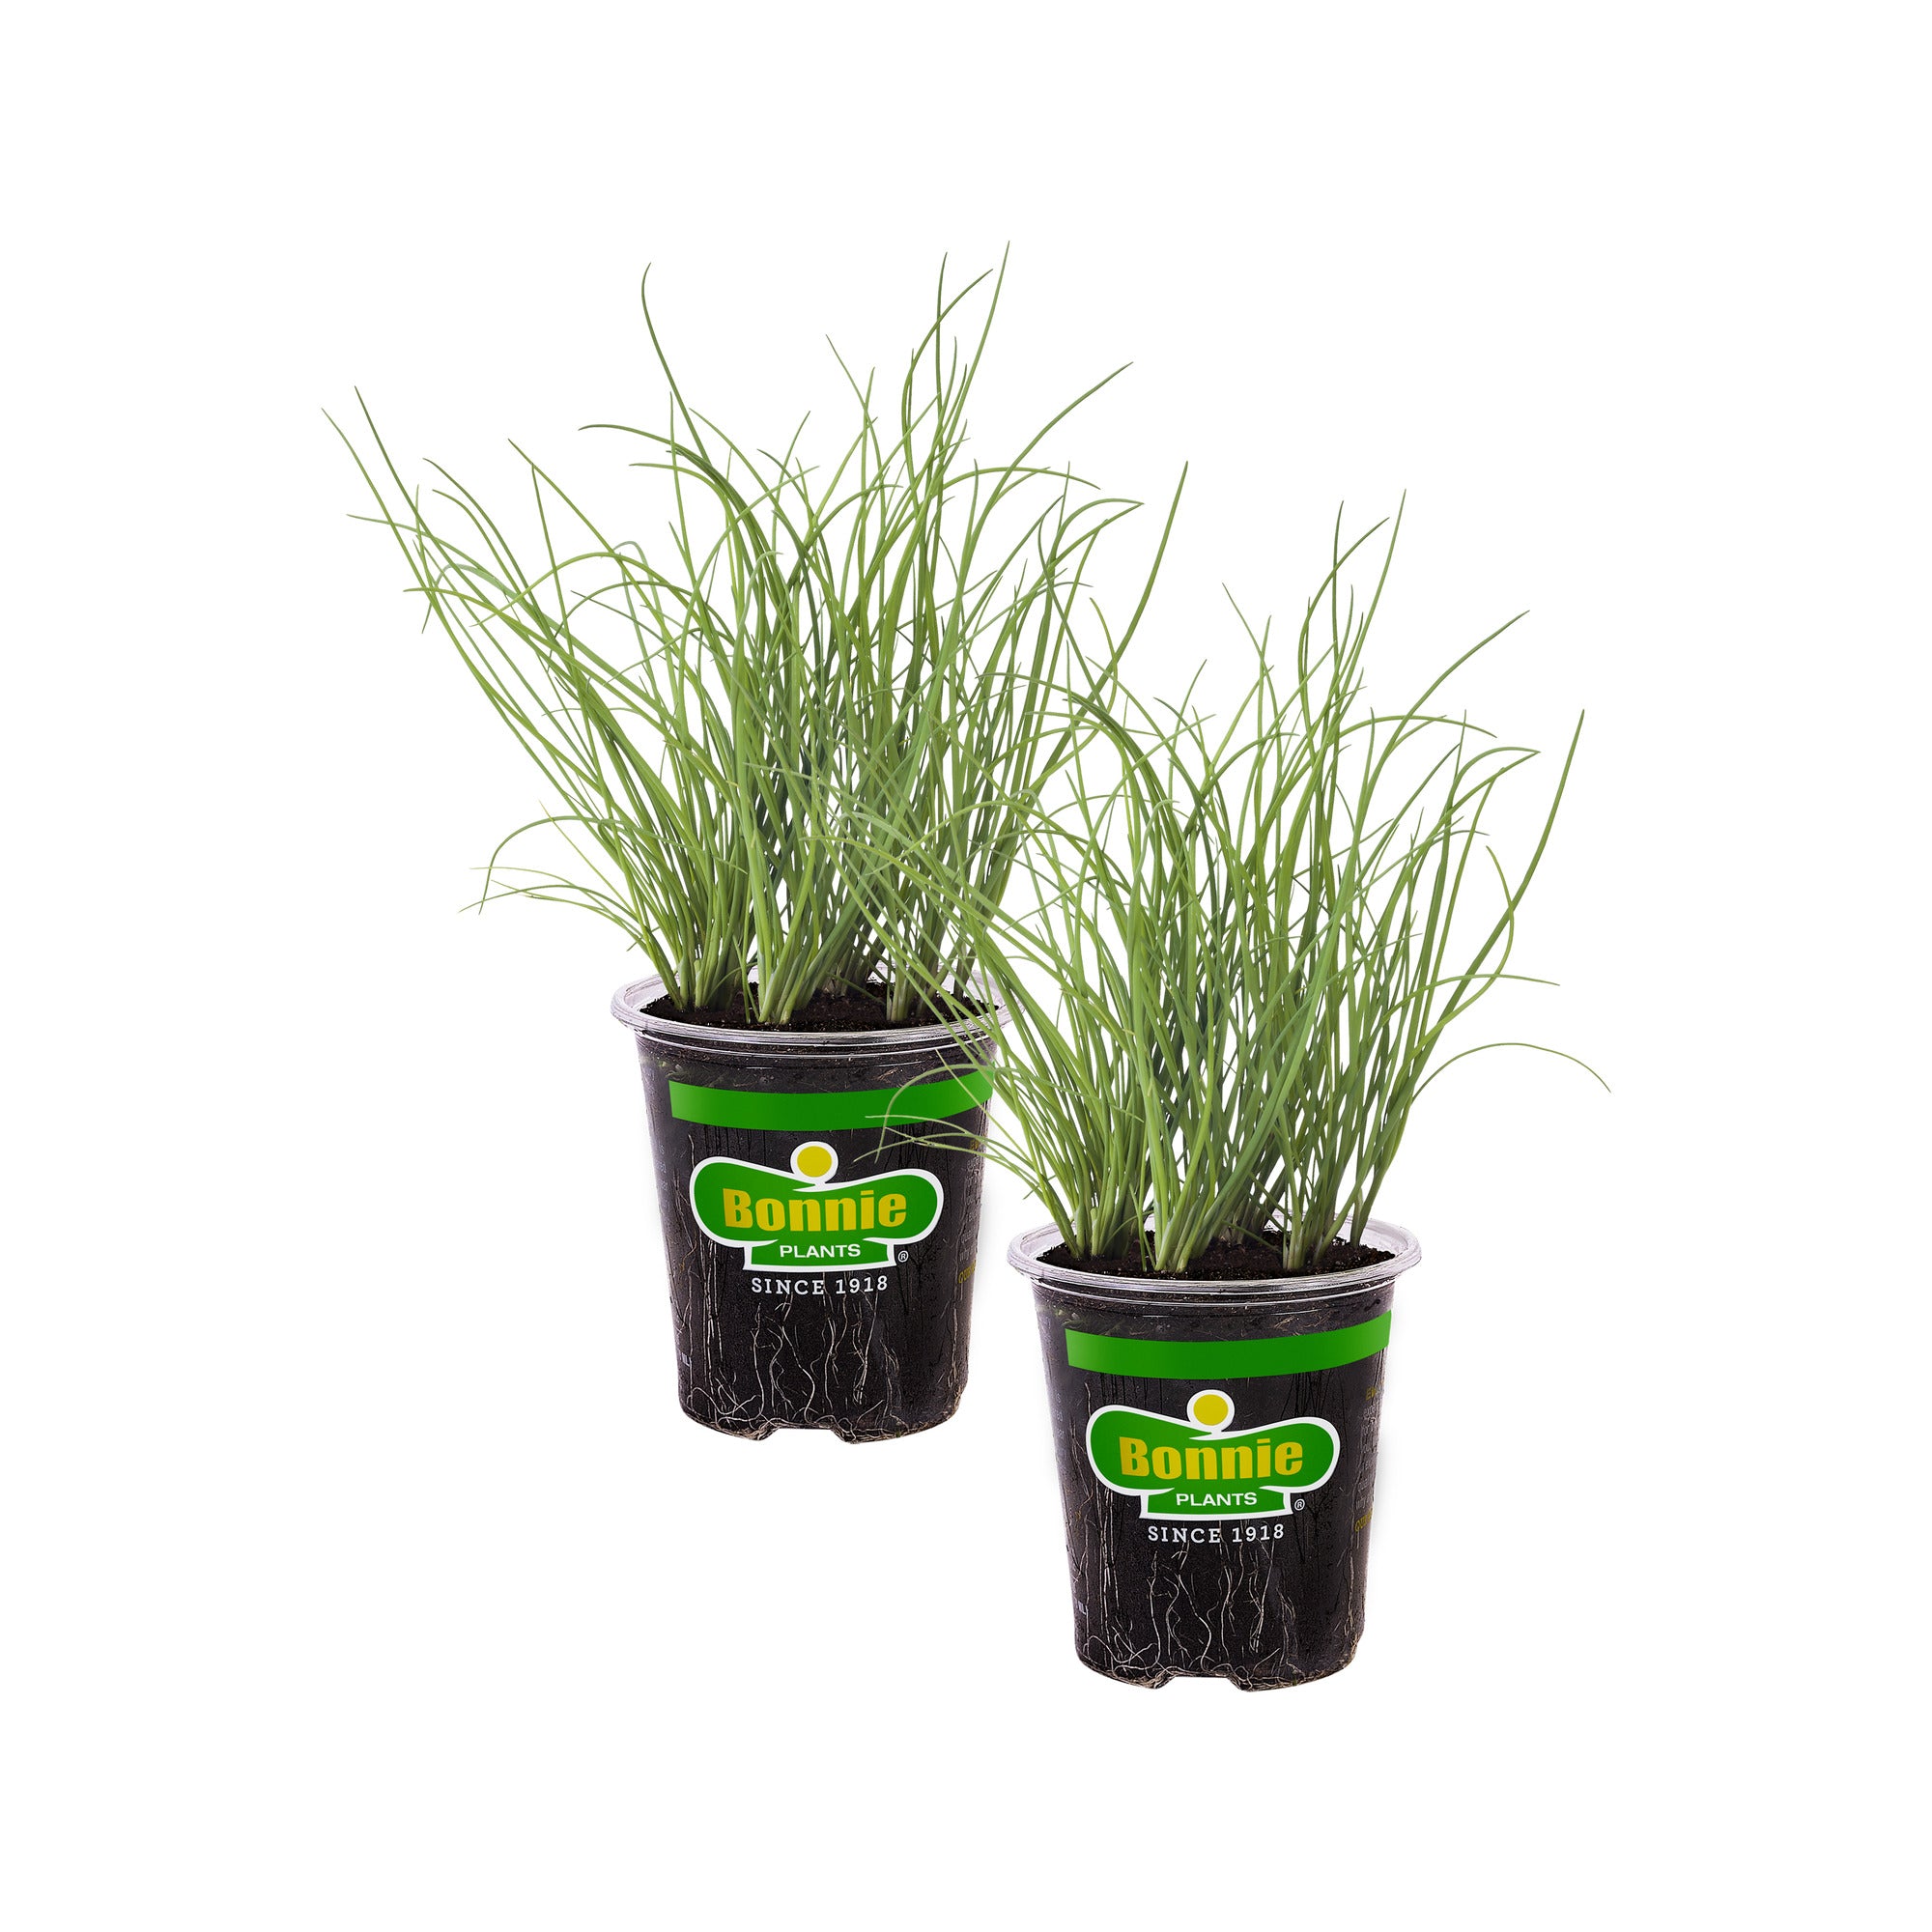 Chives (2 Pack)